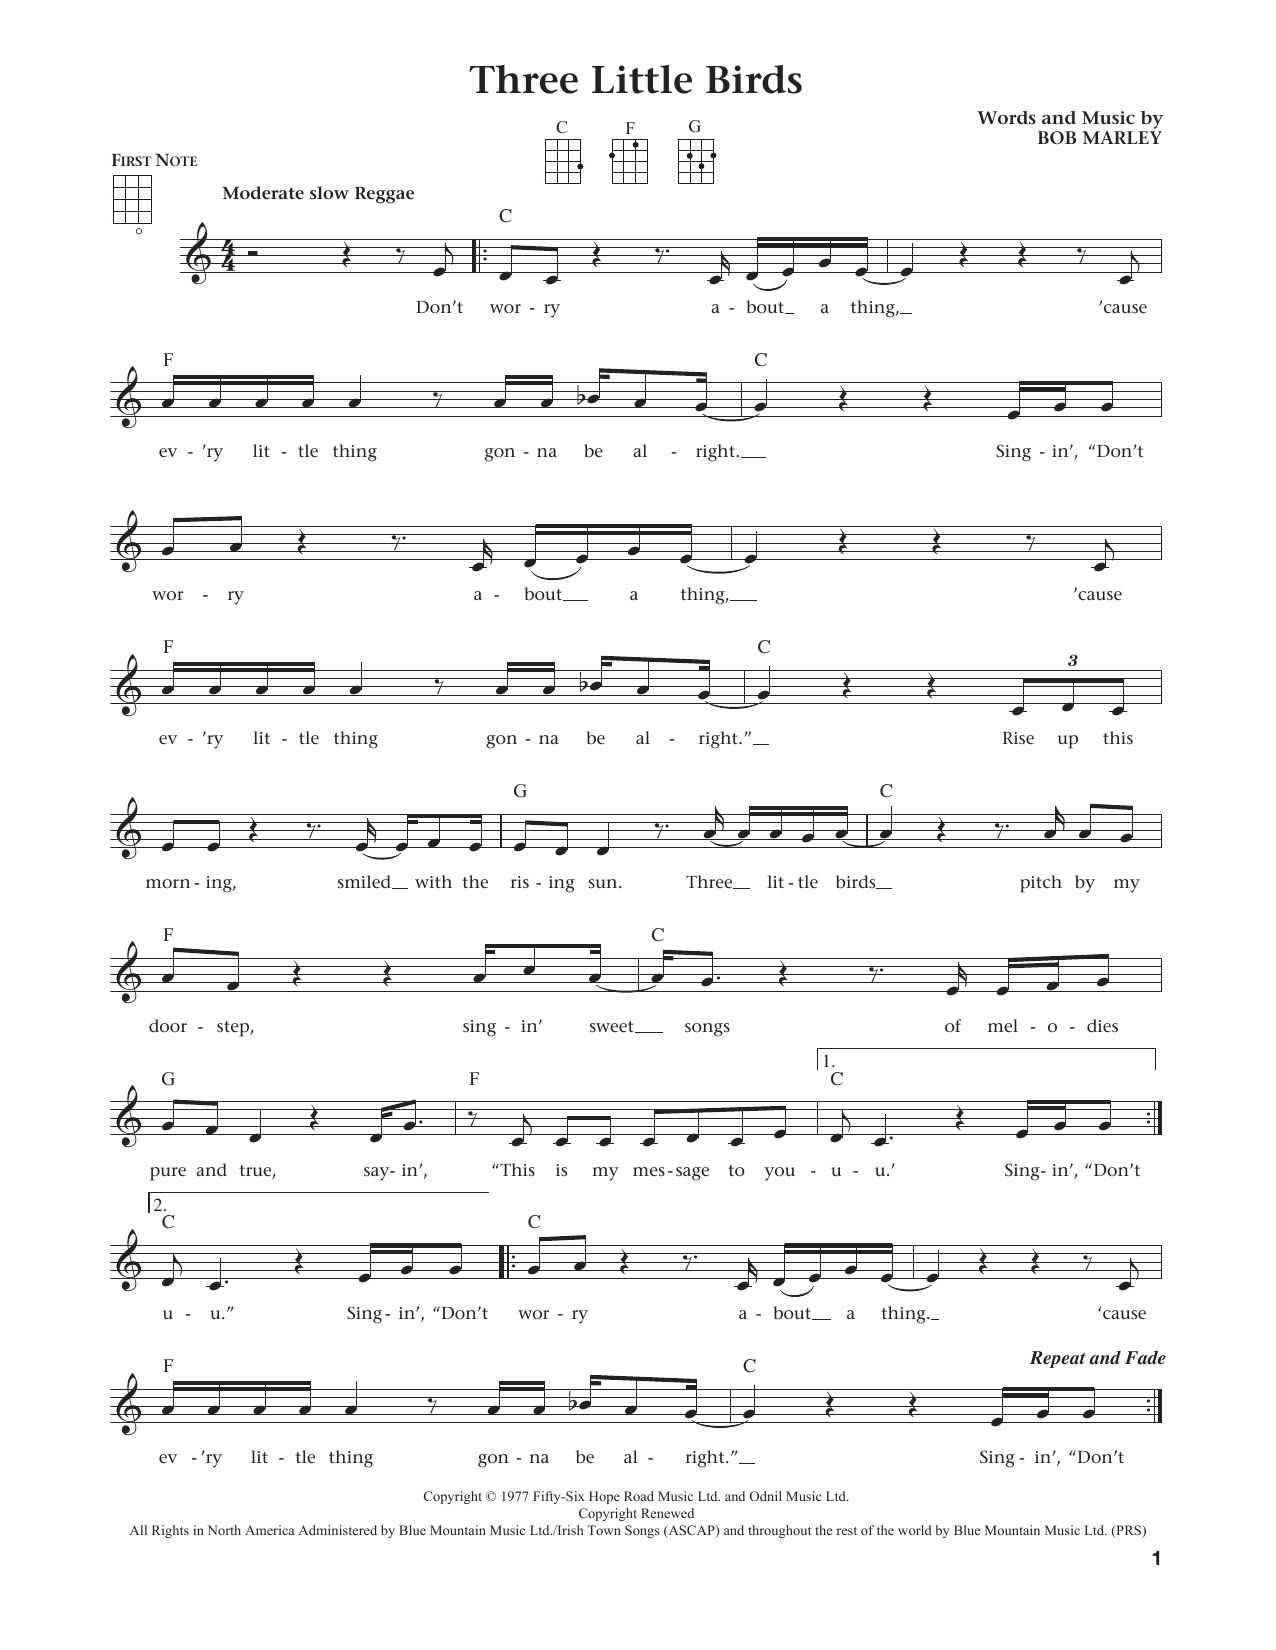 Download Bob Marley Three Little Birds (from The Daily Ukul Sheet Music